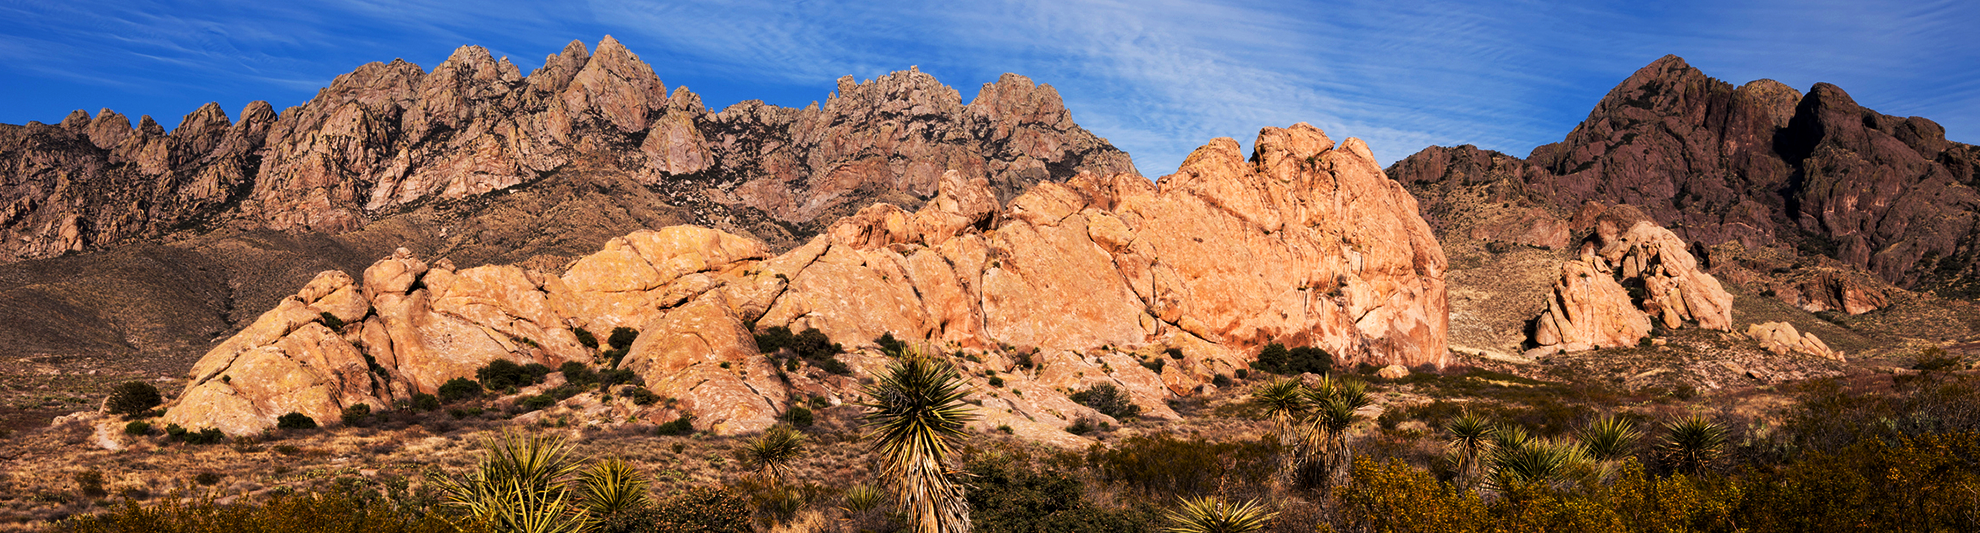 image of organ mountains in las cruces, new mexico